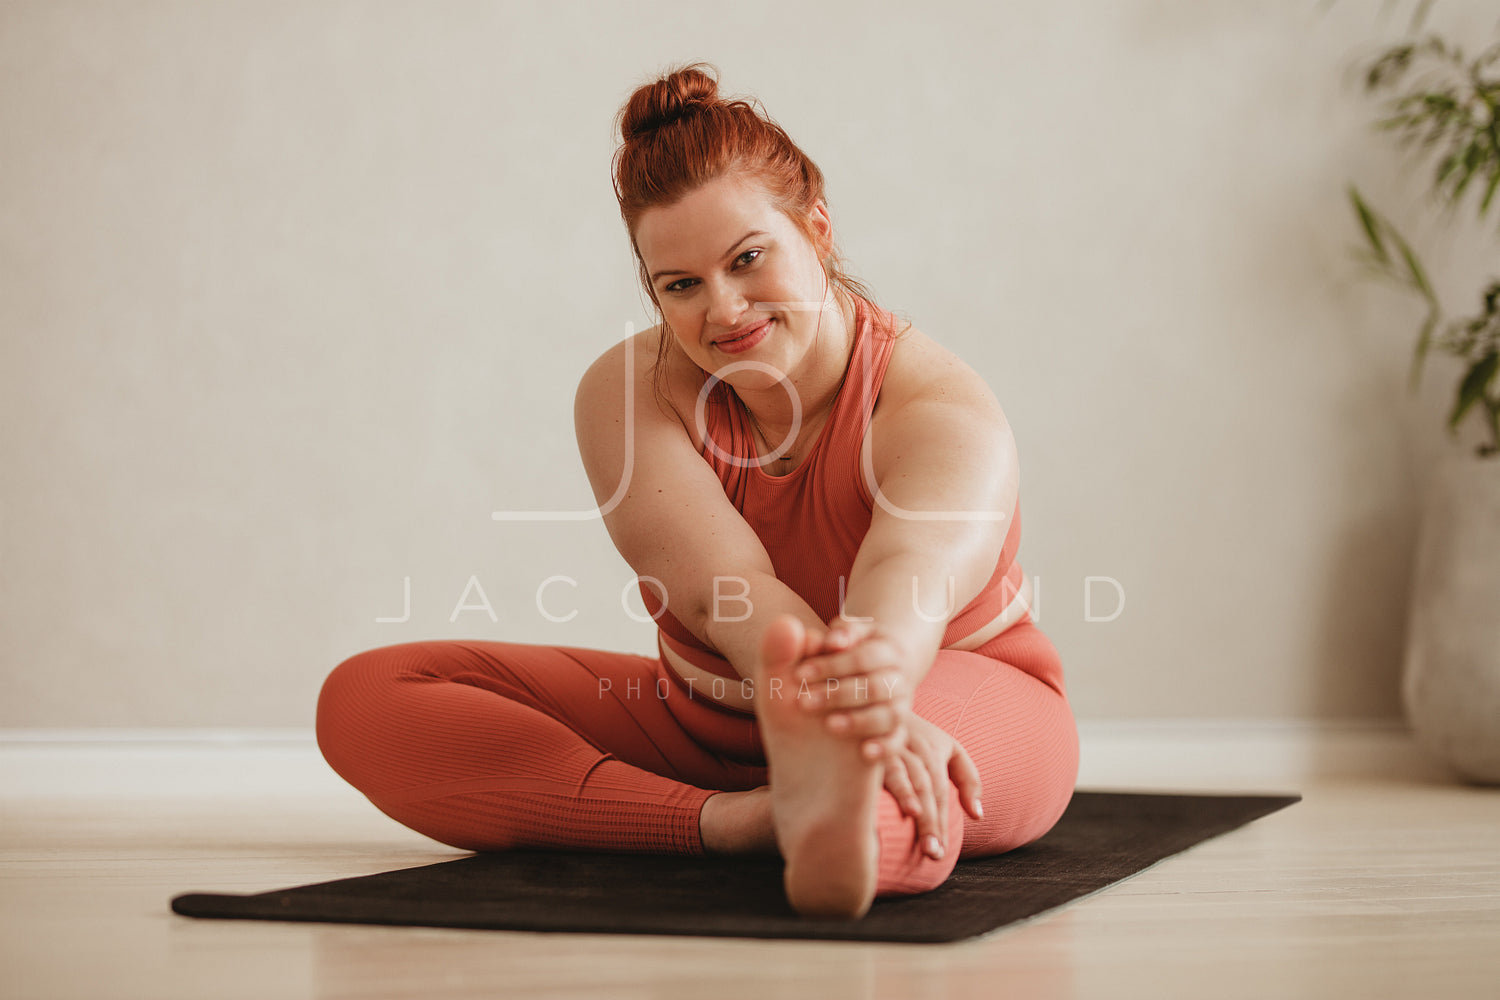 Plus size woman workout with resistance band – Jacob Lund Photography  Store- premium stock photo